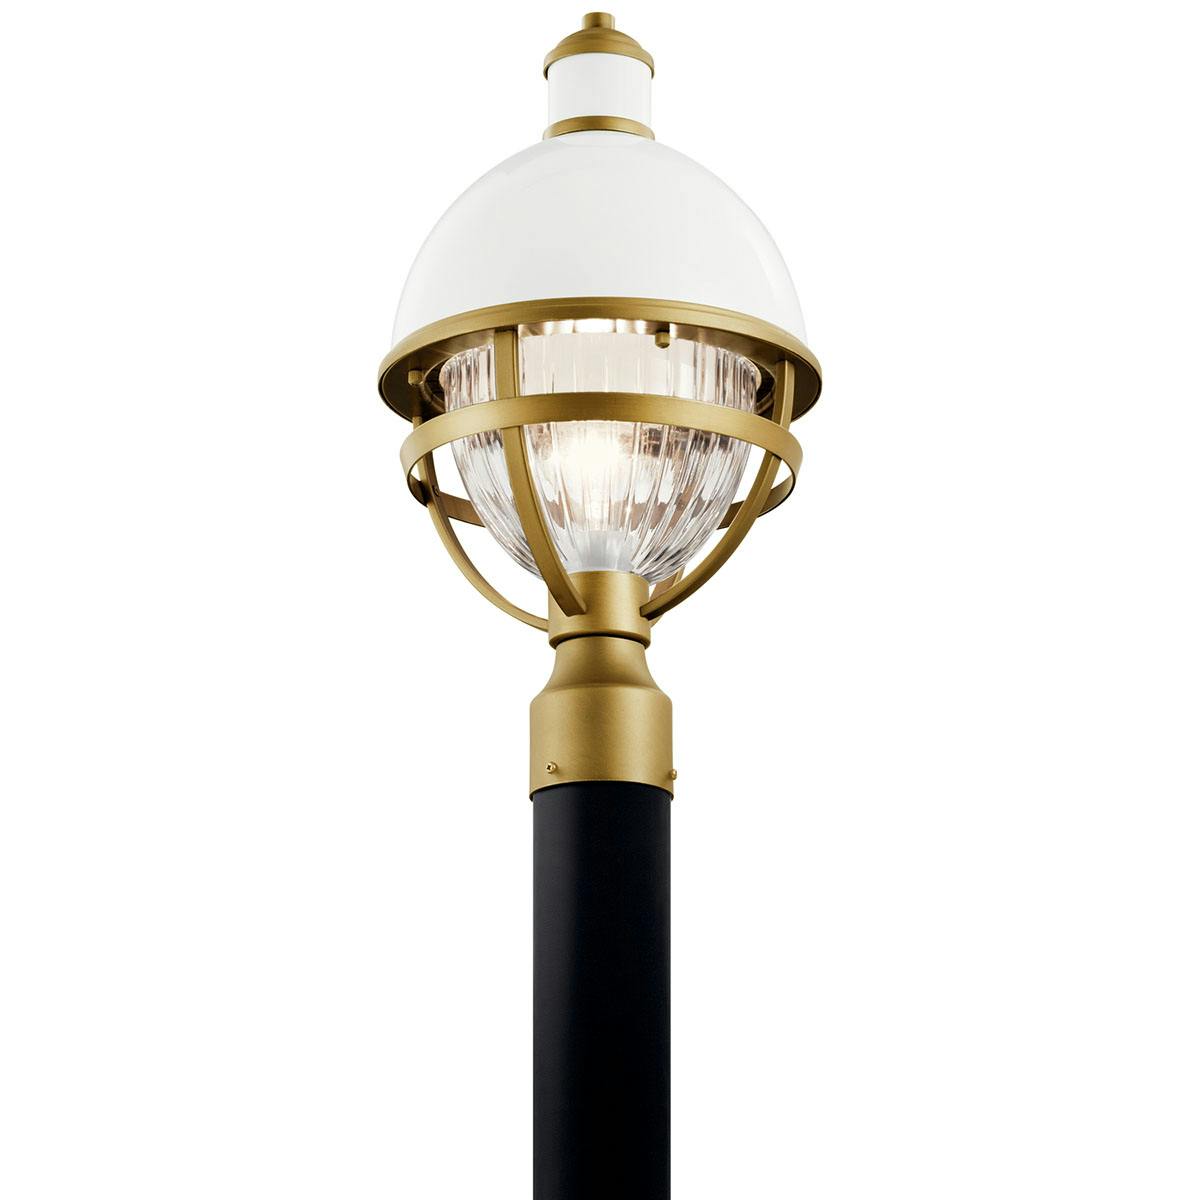 Tollis 1 Light Post Light White and Brass on a white background